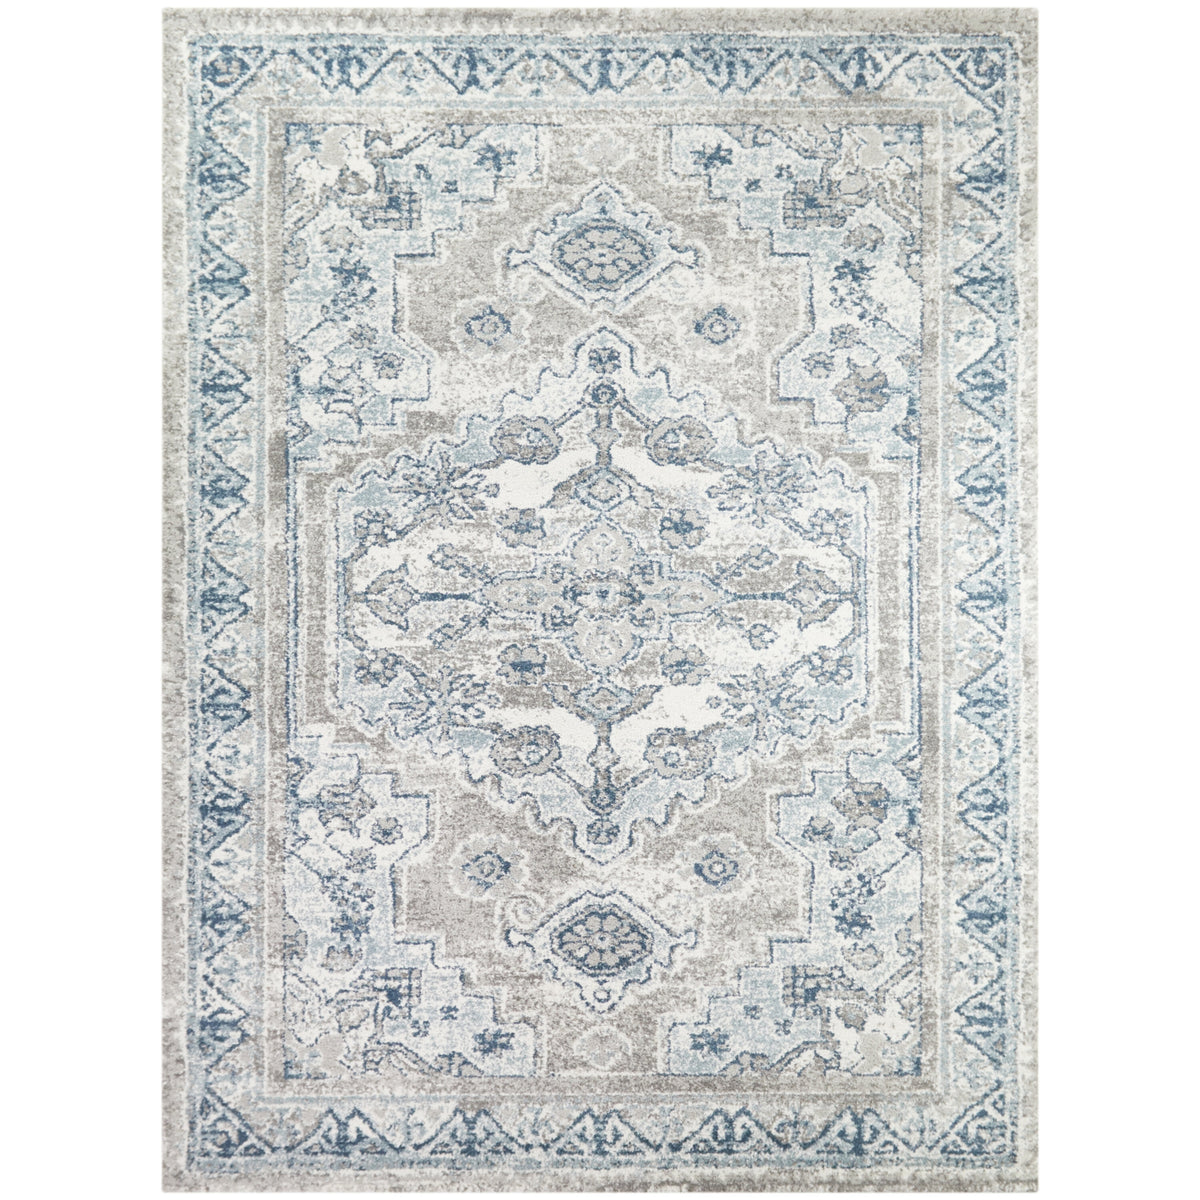 Lawson Traditional Persian Area Rug